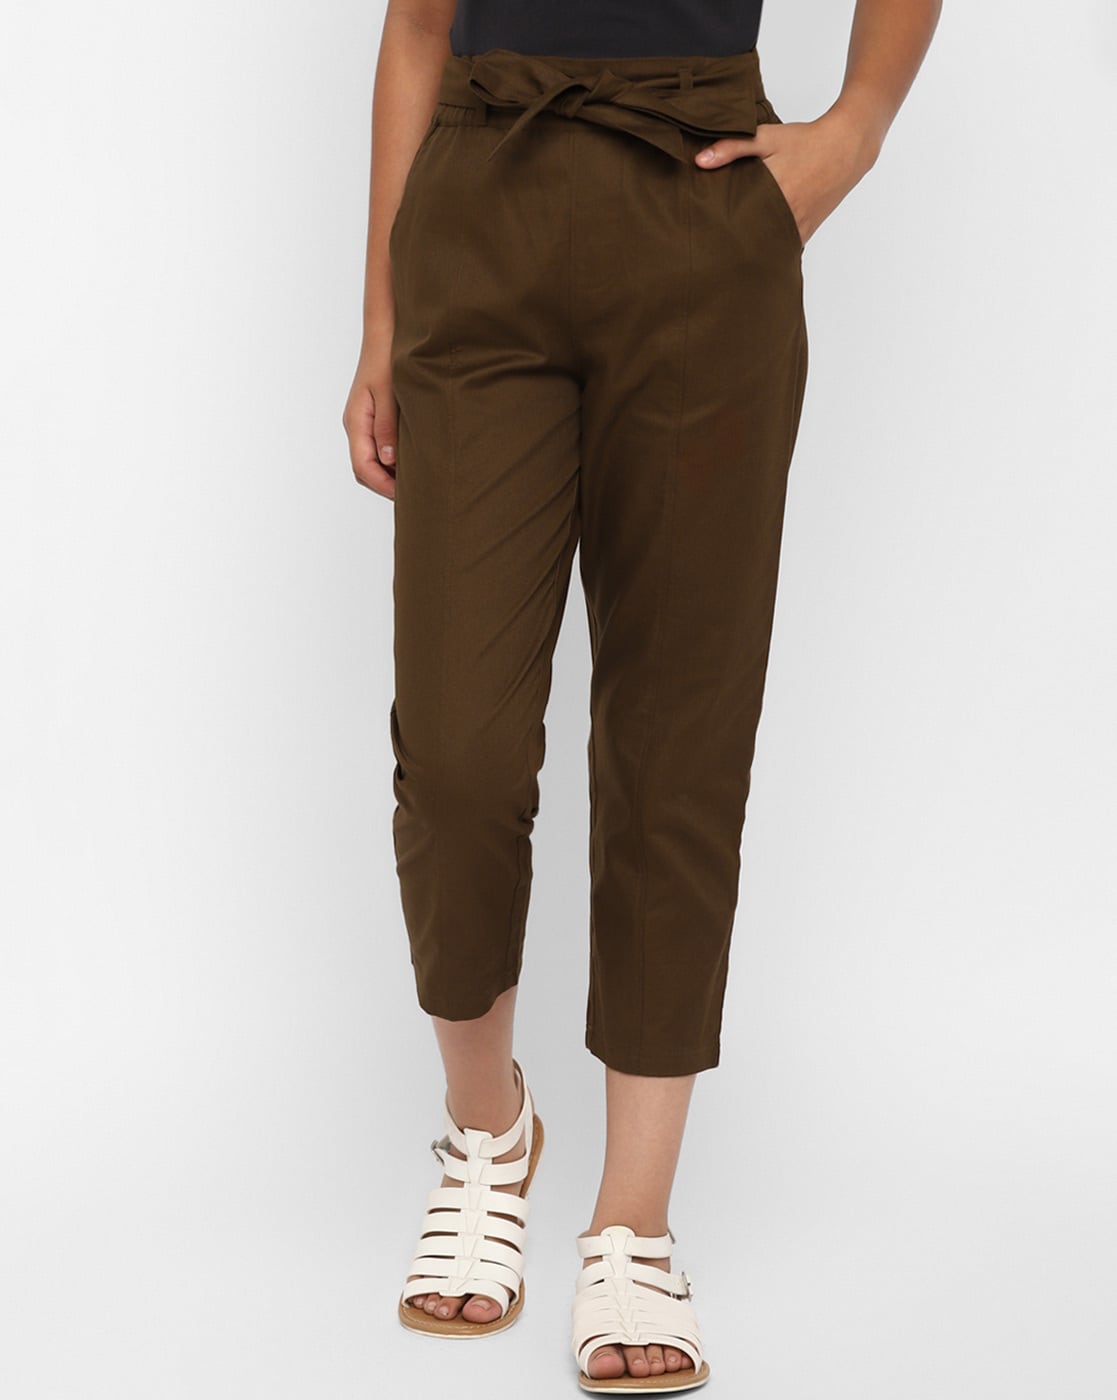 Cargo Pants For Ladies - Multiple Color Options | Multisize | Fashion |  Tops For Women | Women'S Wear